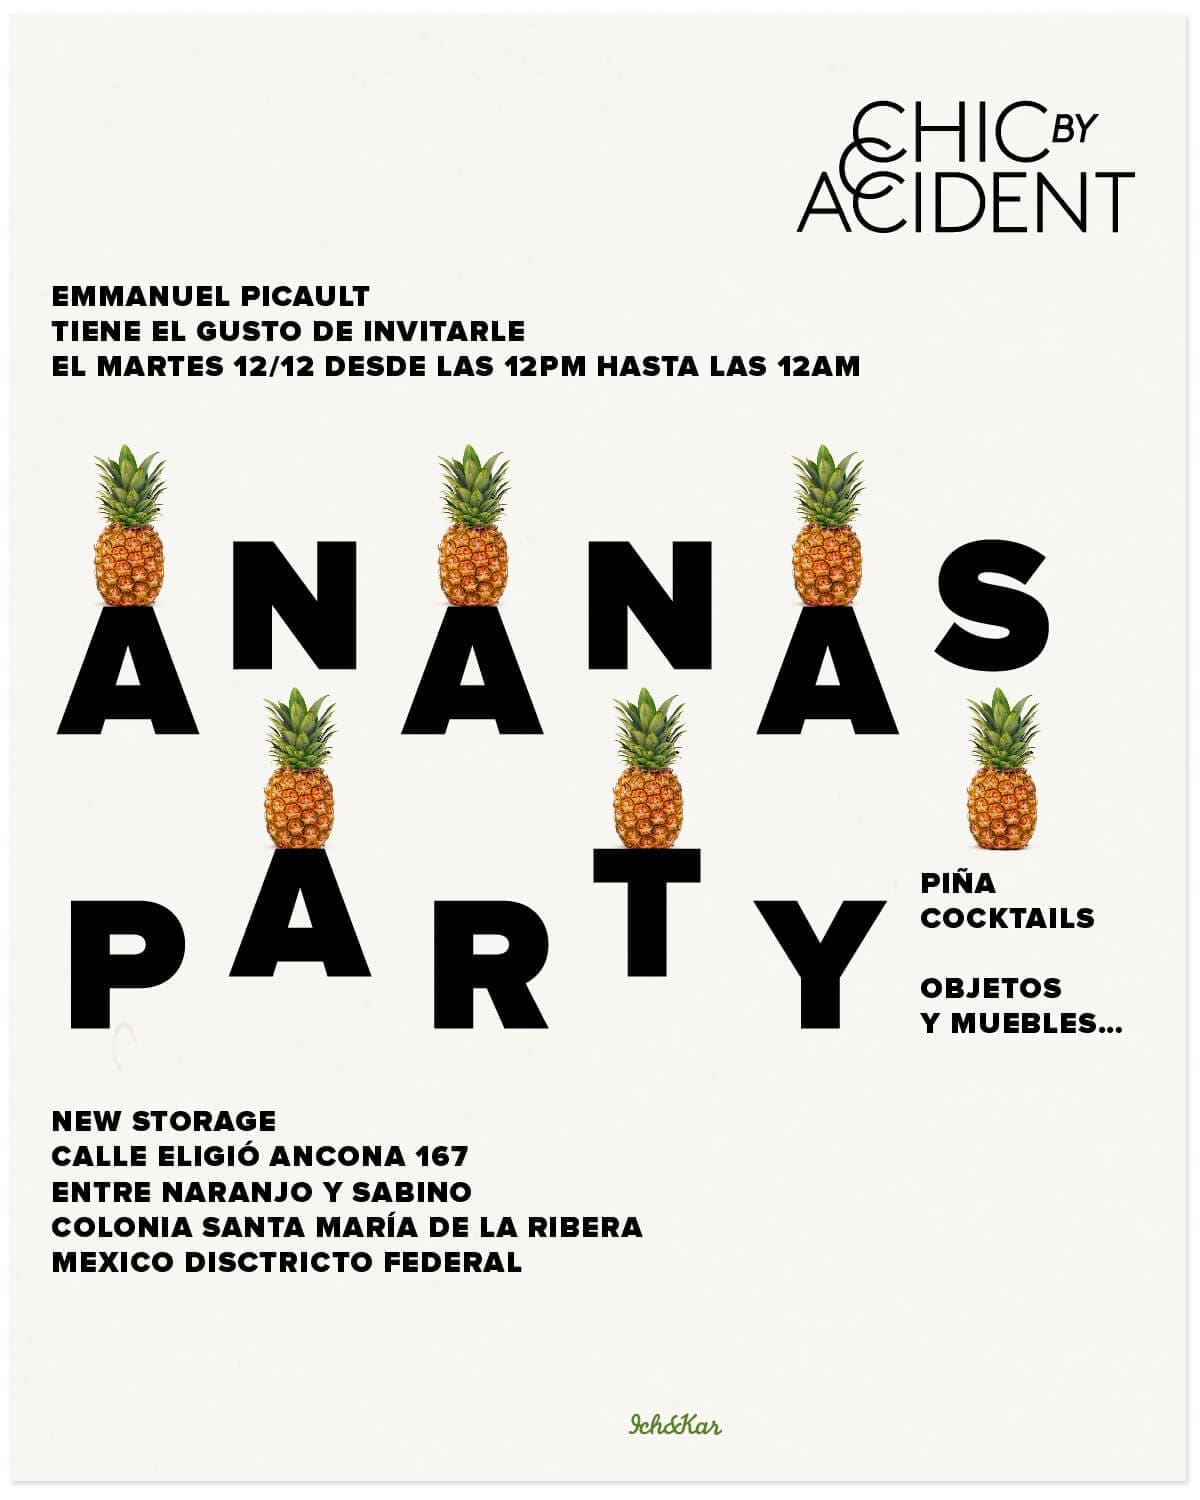 chic-by-accident-invitation-2017-ananas-party